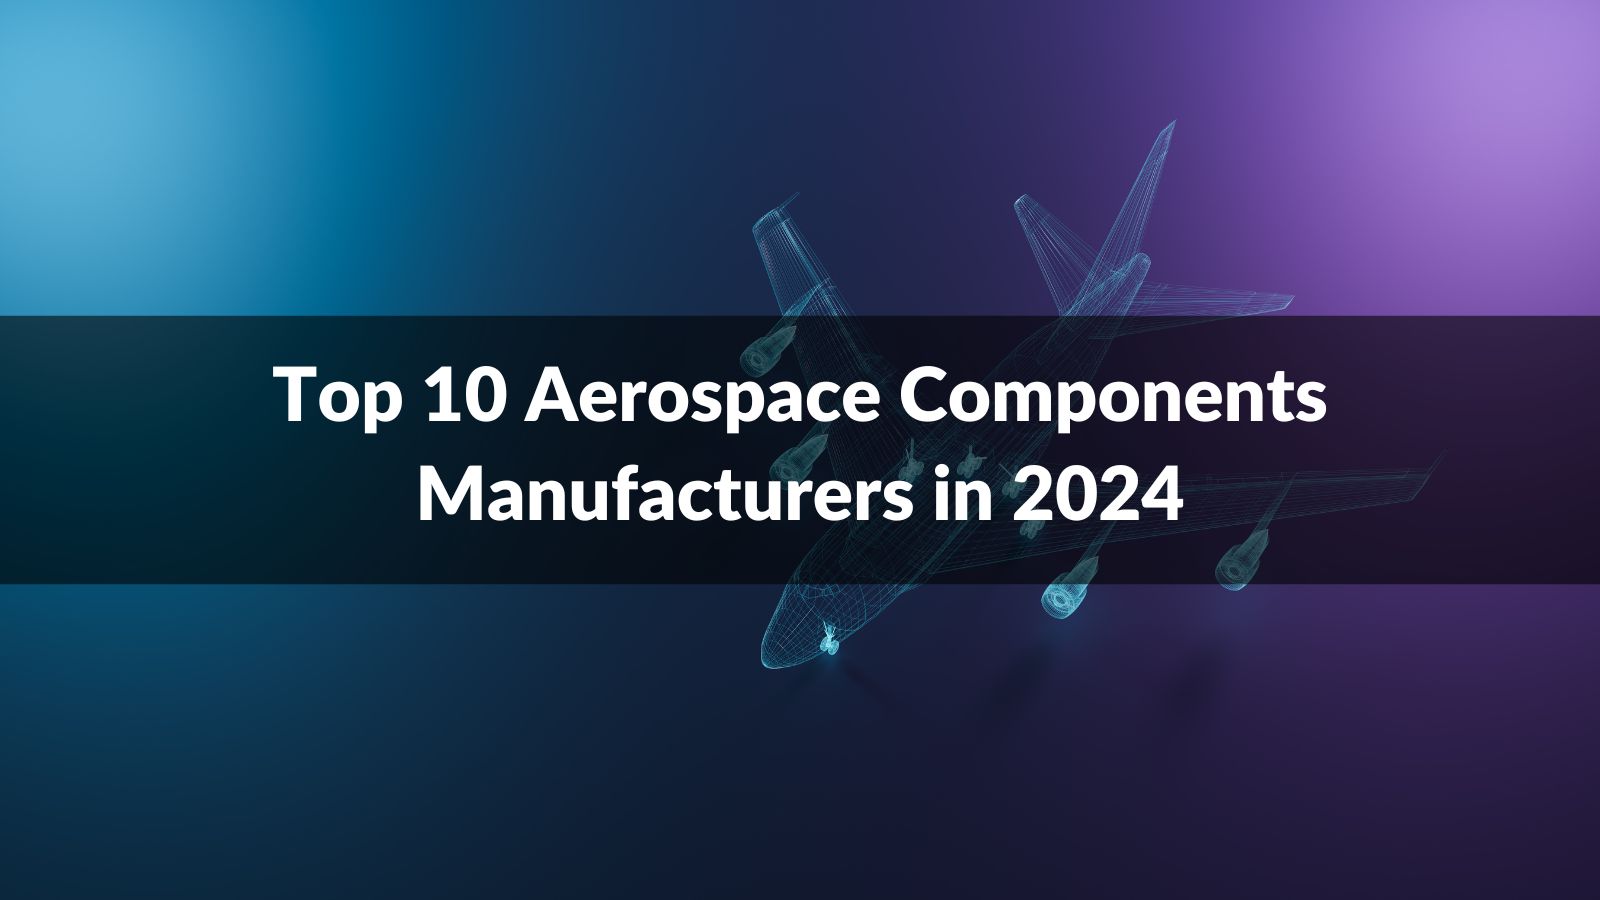 Top 10 Aerospace Components Manufacturers in 2024